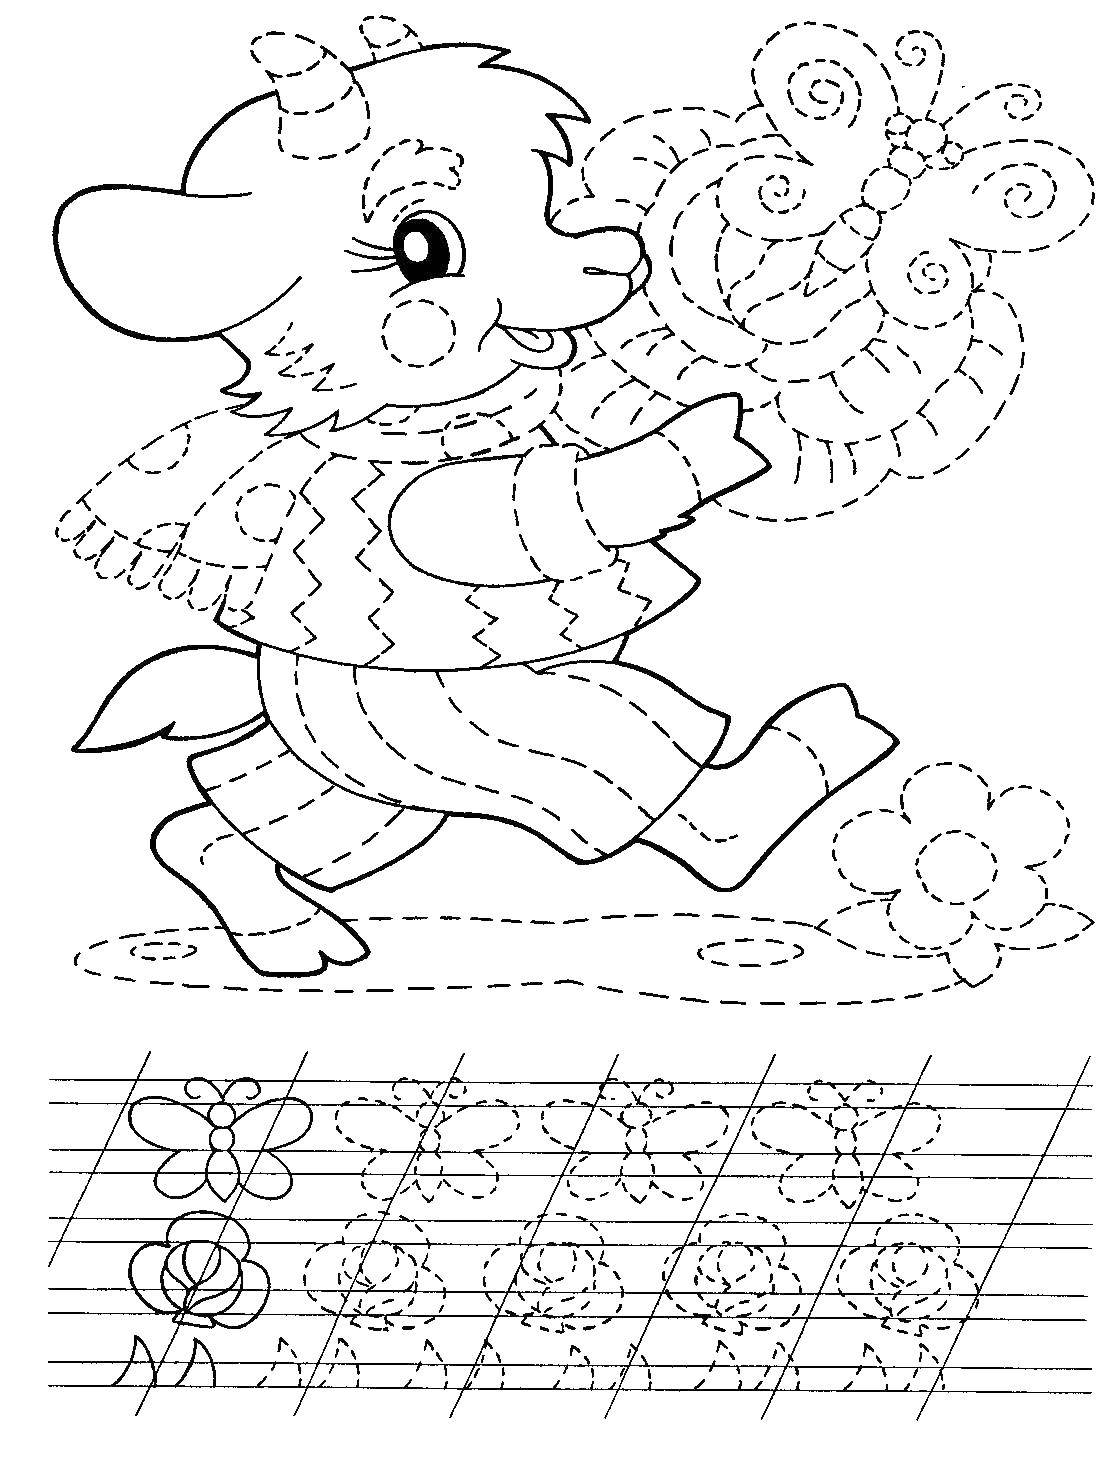 Coloring Recipe with goat. Category school. Tags:  goat, butterfly, cursive;.